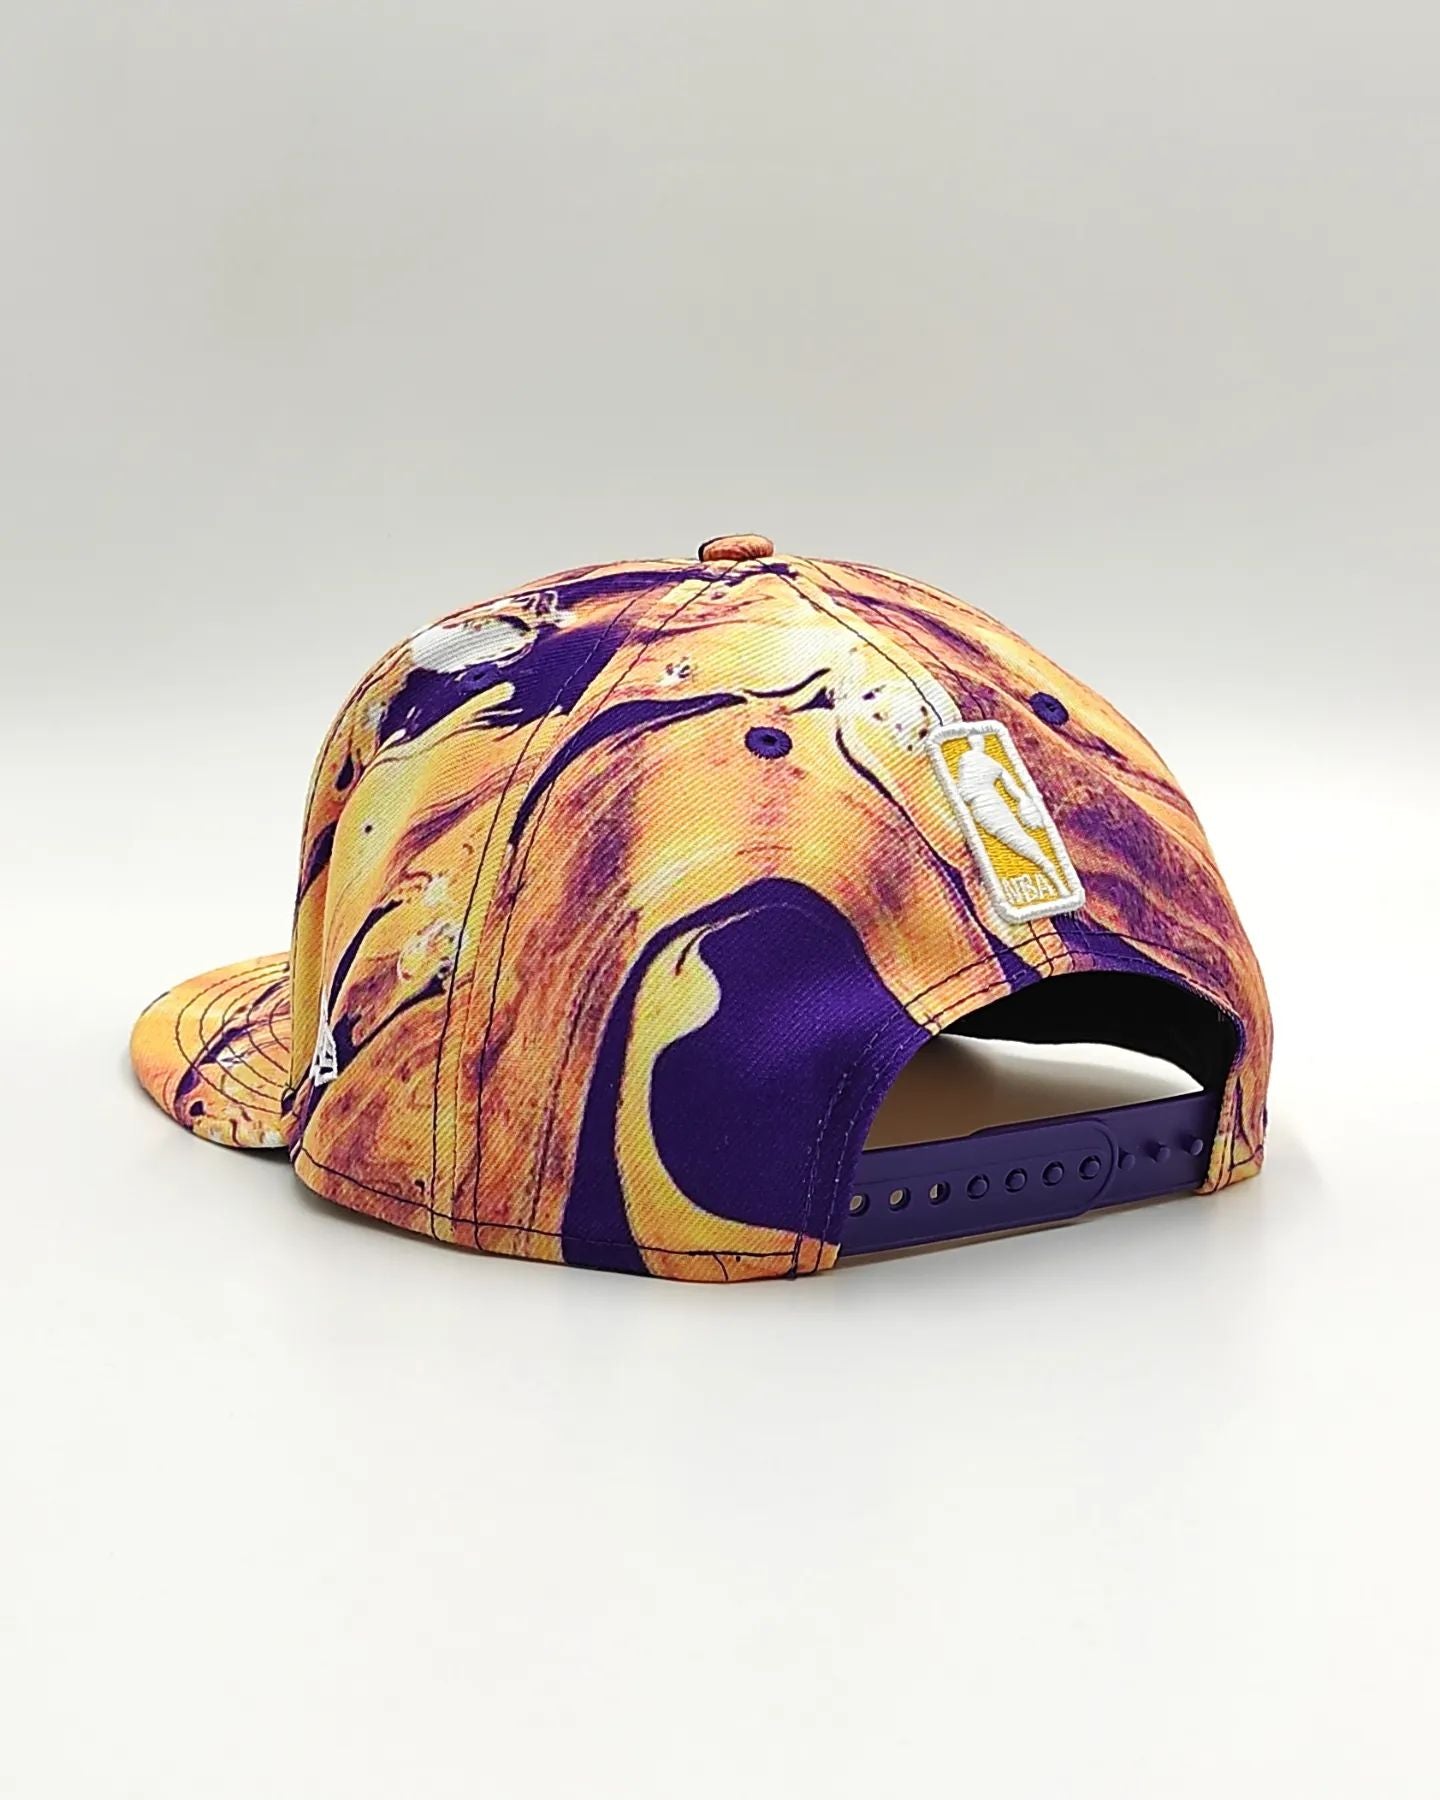 GORRA NEW ERA LOS ANGELES LAKERS 9FIFTY SNAP COLORS